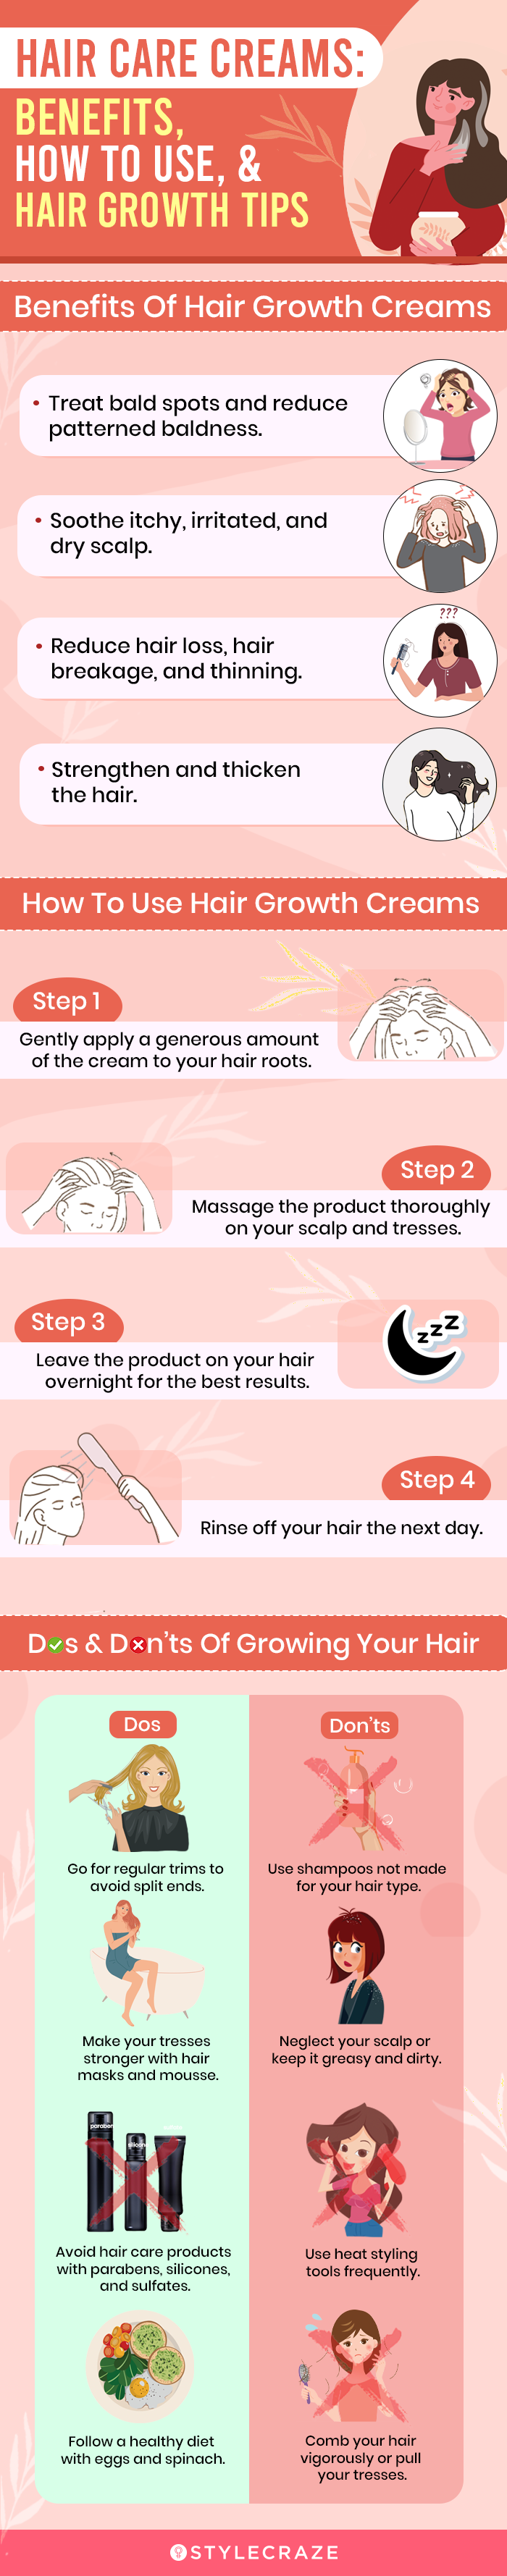 Hair Care Creams: Benefits & How To Use